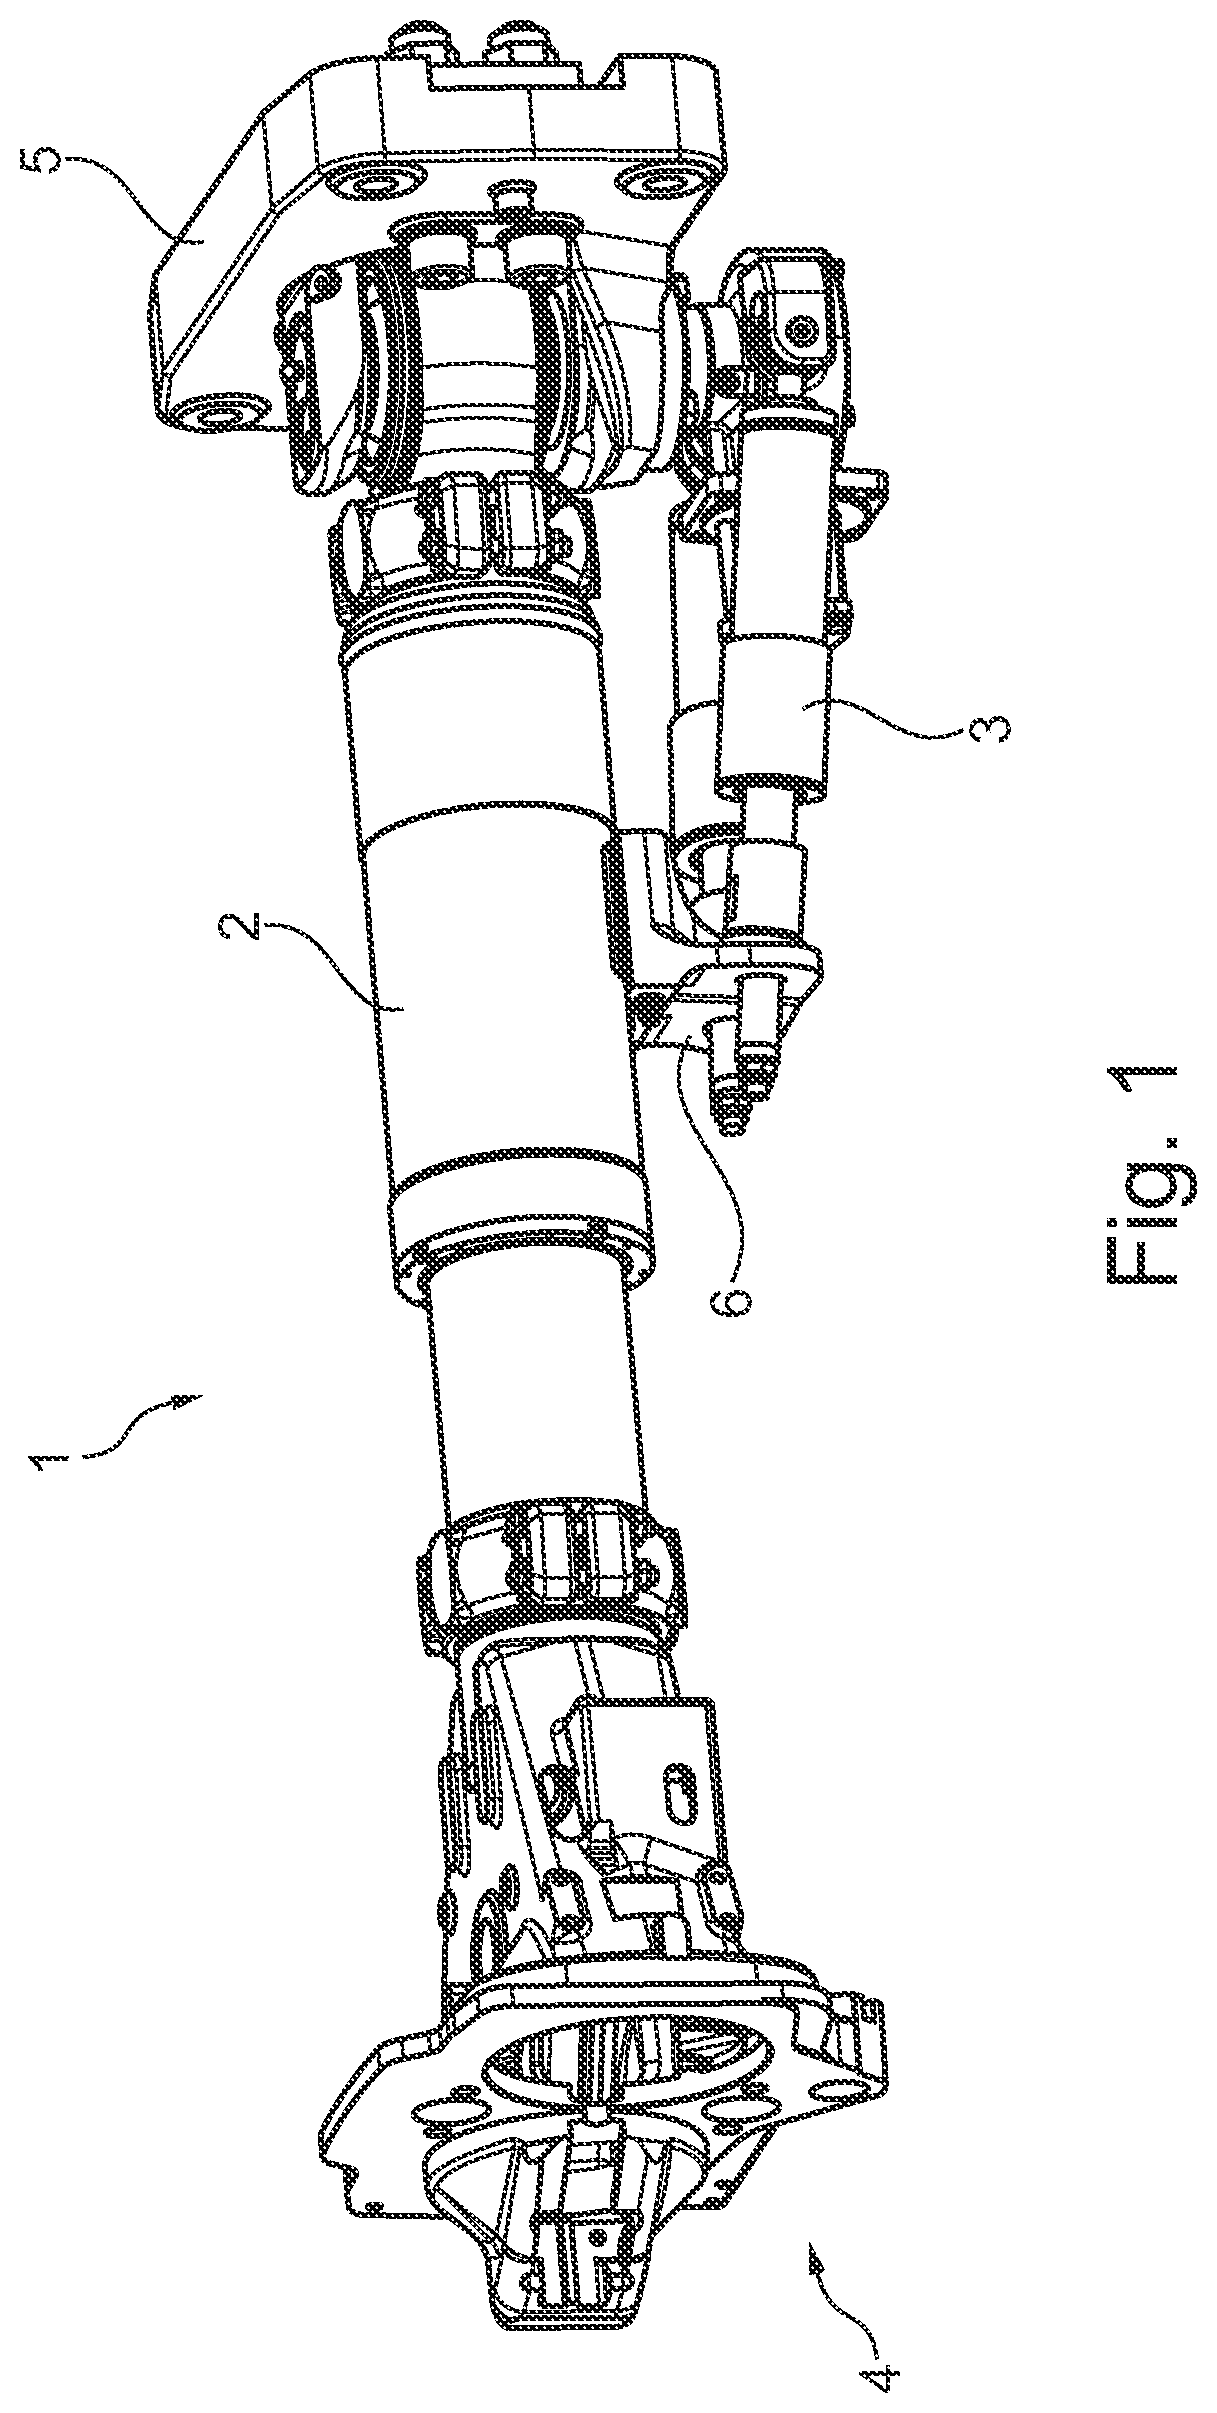 Holder for mounting a second part on a main structure between car body ends of a rail vehicle